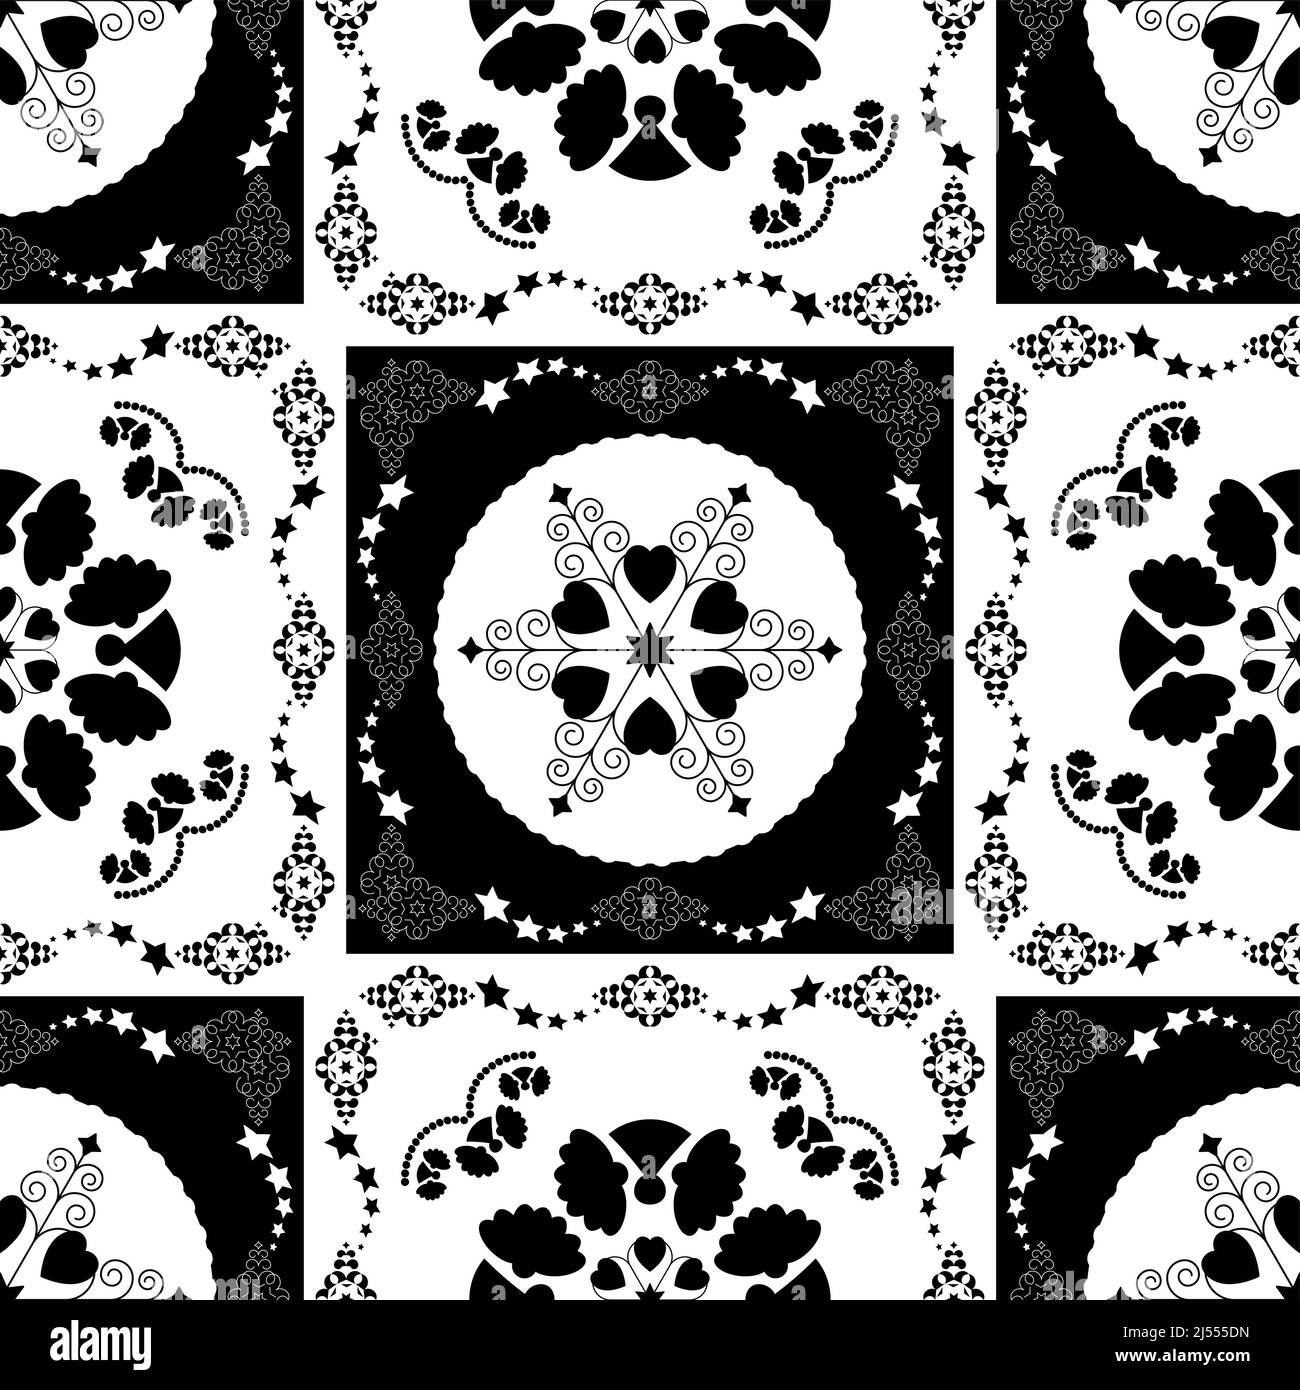 Seamless pattern. Christmas theme. Pretty mandalas with angels and hearts. Black and white. Vector illustration. Stock Vector